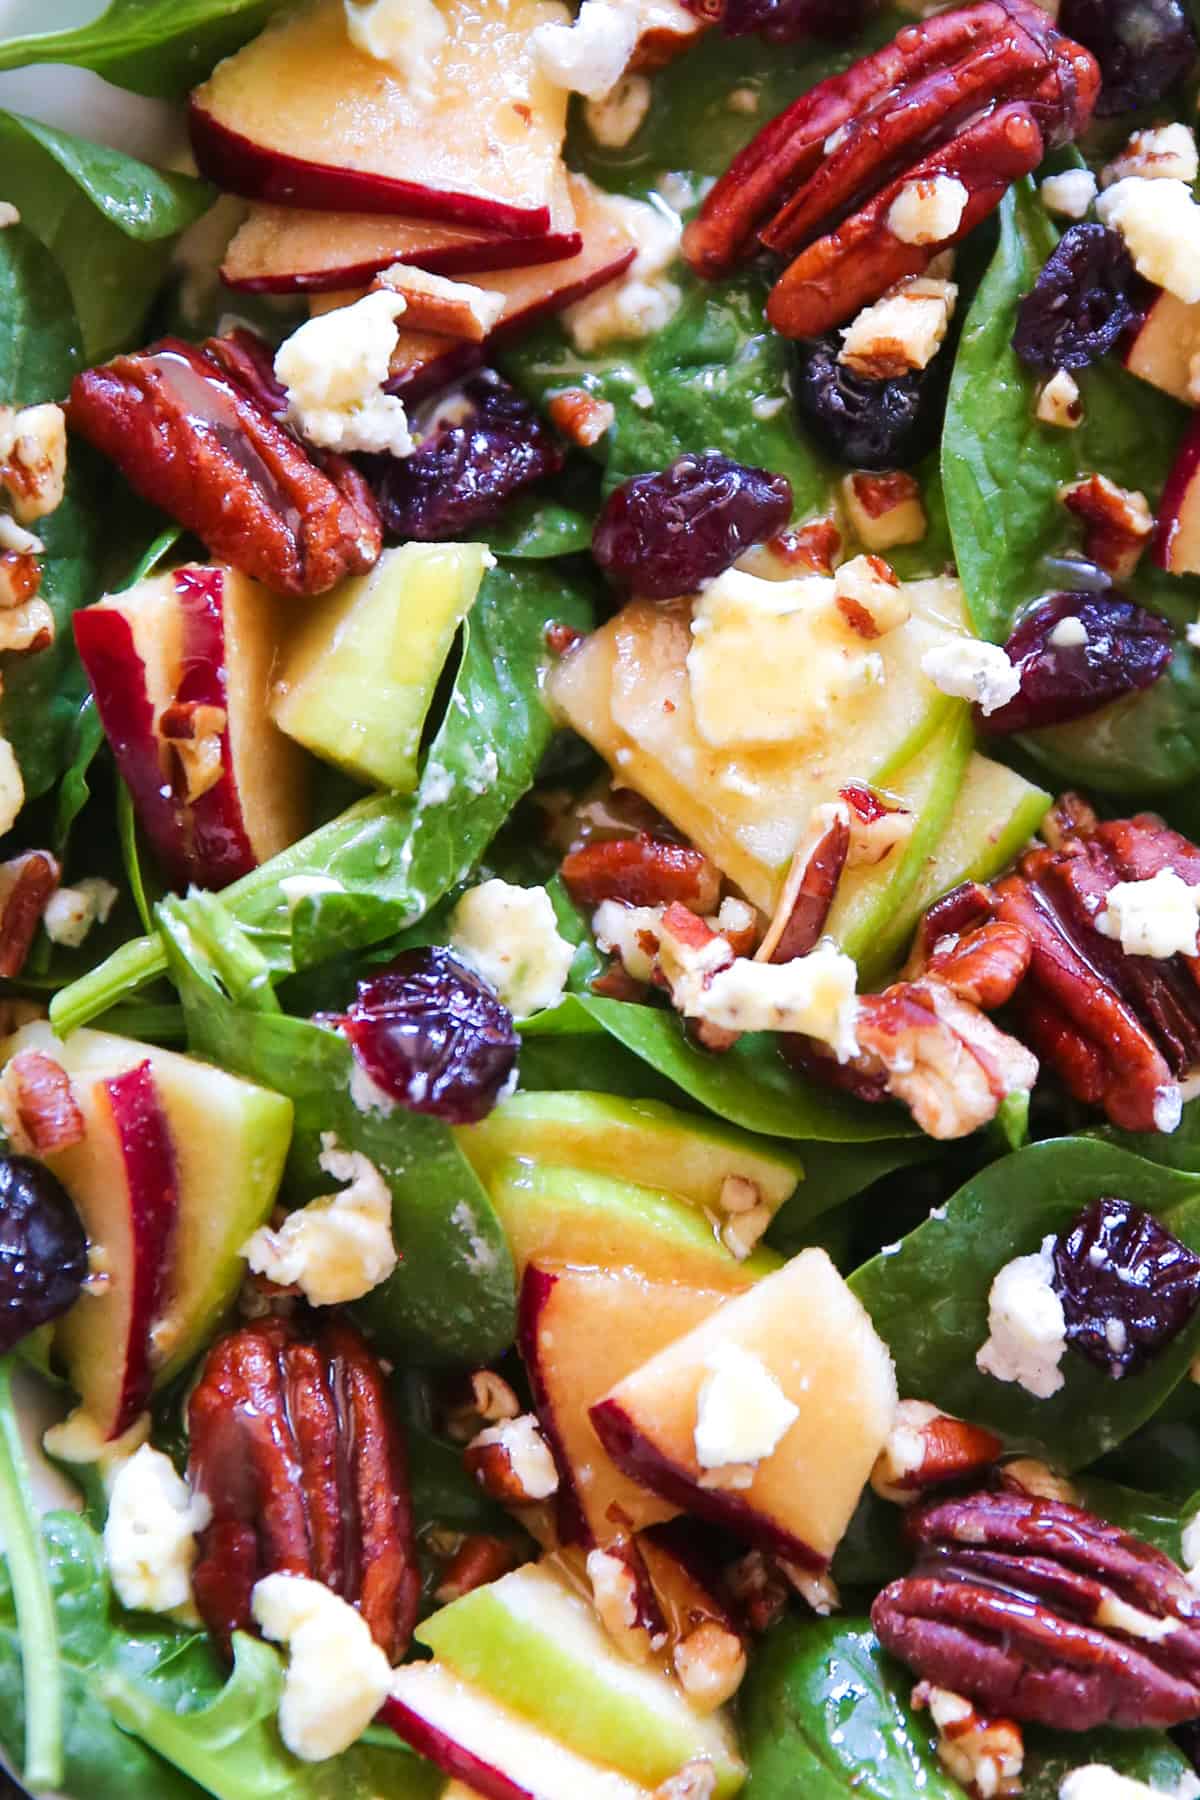 Apple Spinach Salad with Cranberries, Pecans, and Goat Cheese - close-up photo.